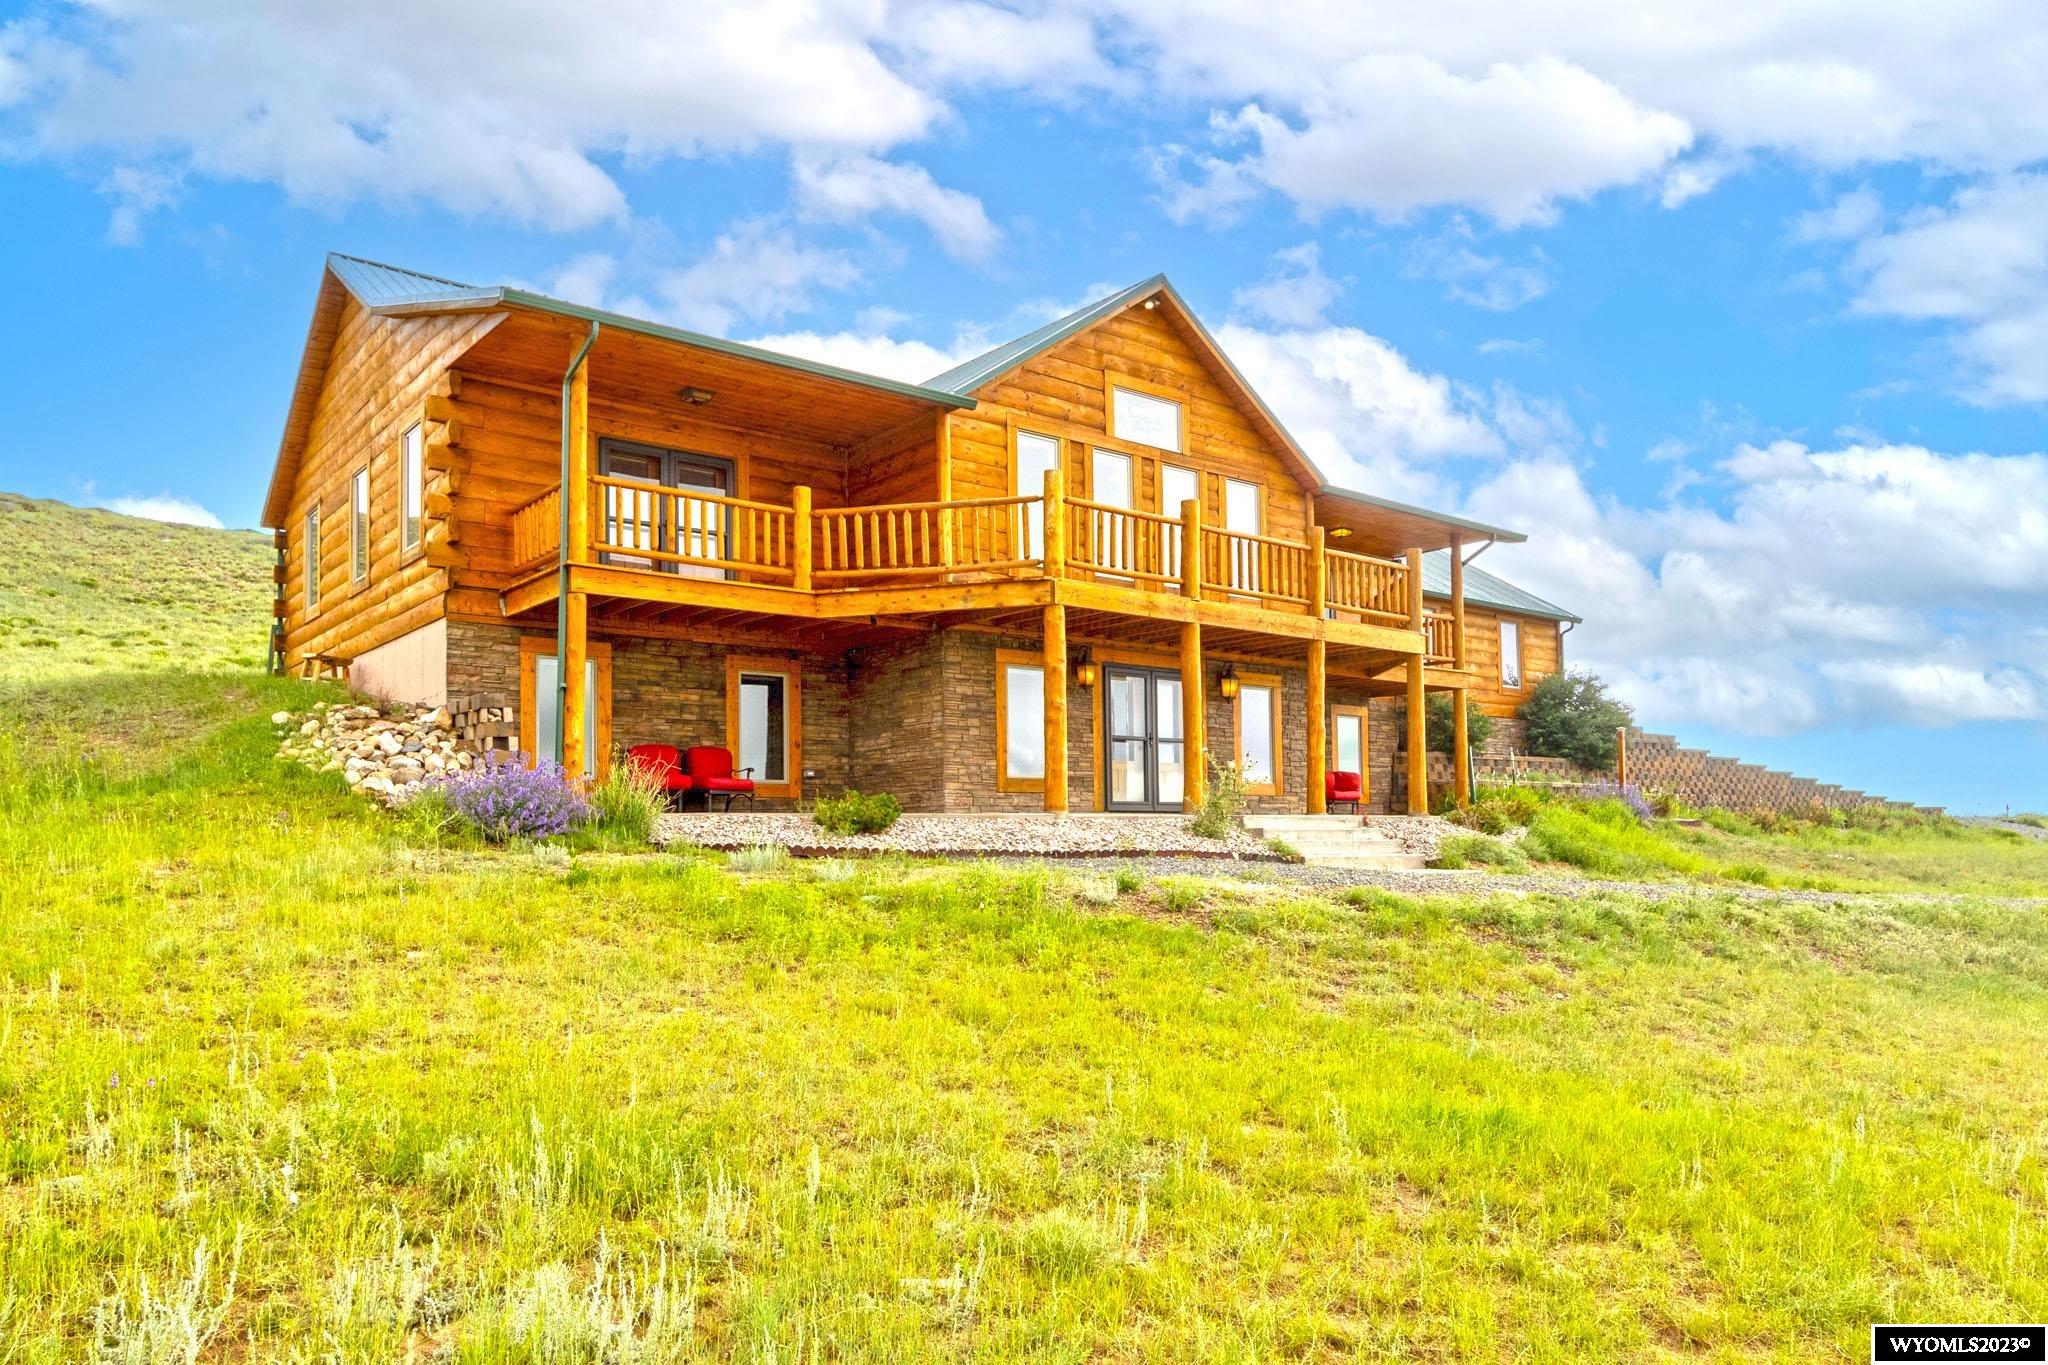 Prepare to be captivated by the sheer beauty of this remarkable property. Built in 2015, this custom log home spans 3,864 square feet in the main house, offering a spacious and inviting sanctuary. With 4 generously sized bedrooms, 3 bathrooms, and ample living space, this home ensures comfort and relaxation for all. Step into the main living area, where vaulted ceilings and four expansive south-facing windows bathe the space in natural light, while treating you to breathtaking views of Lake Hattie and Sheep Mountain. Revel in the warmth of the wood burning fireplace, gracing the main level, while the stunning wood floors throughout the upper level add a touch of elegance. The kitchen boasts exquisite and low-maintenance granite countertops, enhancing both functionality and aesthetics. This property also features an impressive 62 x 28 outbuilding, serving as a three-stall horse barn, a workshop, and a 840 square foot fully-furnished guest apartment above. The 2 bedroom apartment is equipped with all the necessary appliances for effortless living, making it ideal for guest visits.